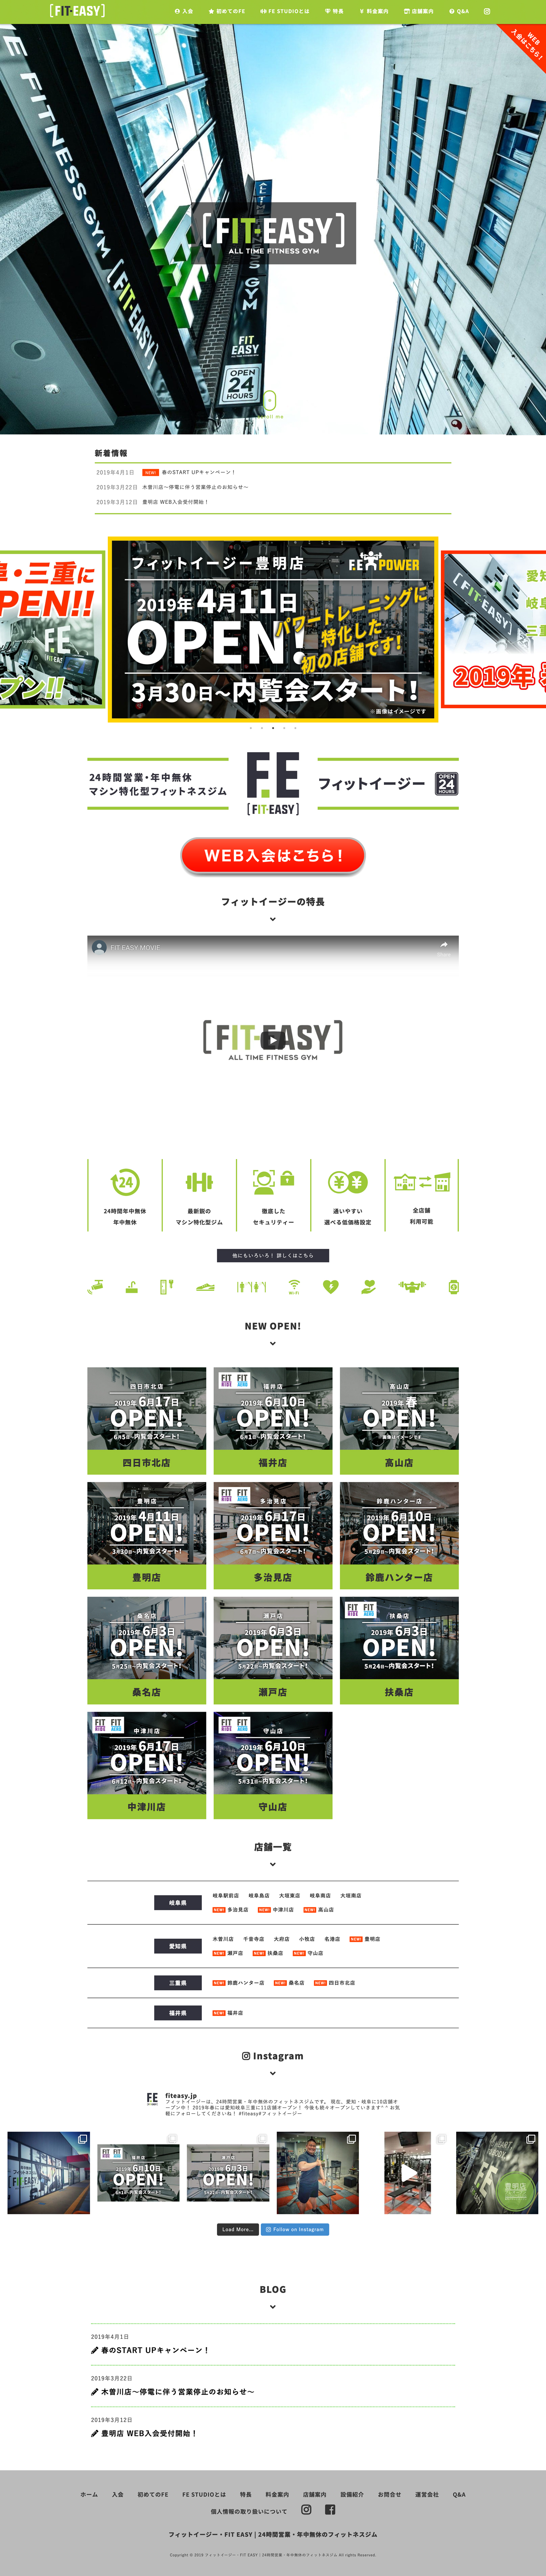 FIT EASY  Webサイト制作